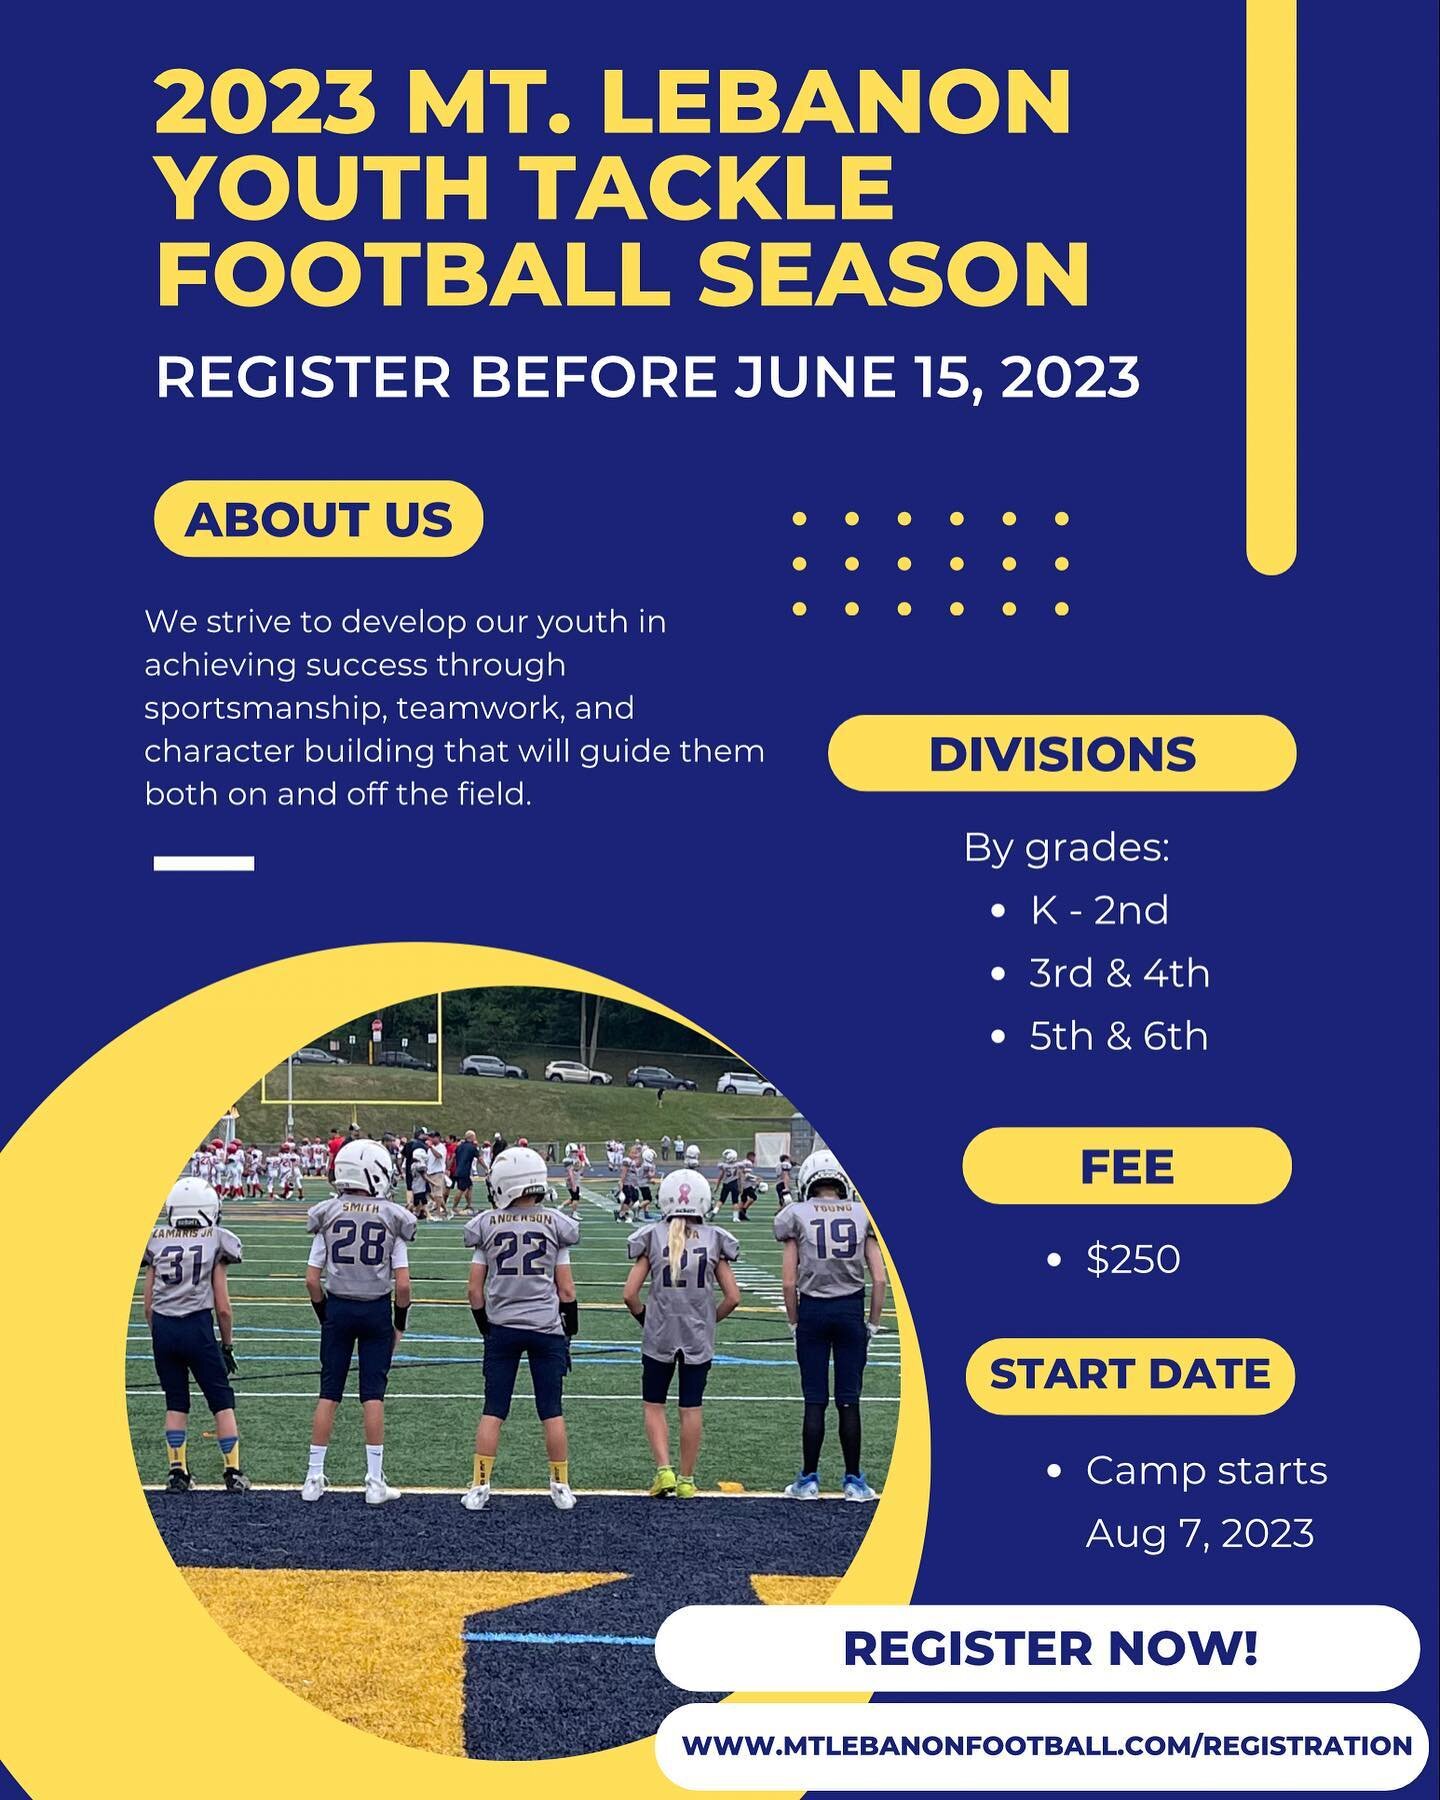 Only 10 MORE DAYS til registration is closed! If you haven&rsquo;t signed your kid(s) up yet, don&rsquo;t wait any longer!

Follow the link below or click the link in the bio to register your kid(s).

https://www.mtlebanonfootball.com/registration

#